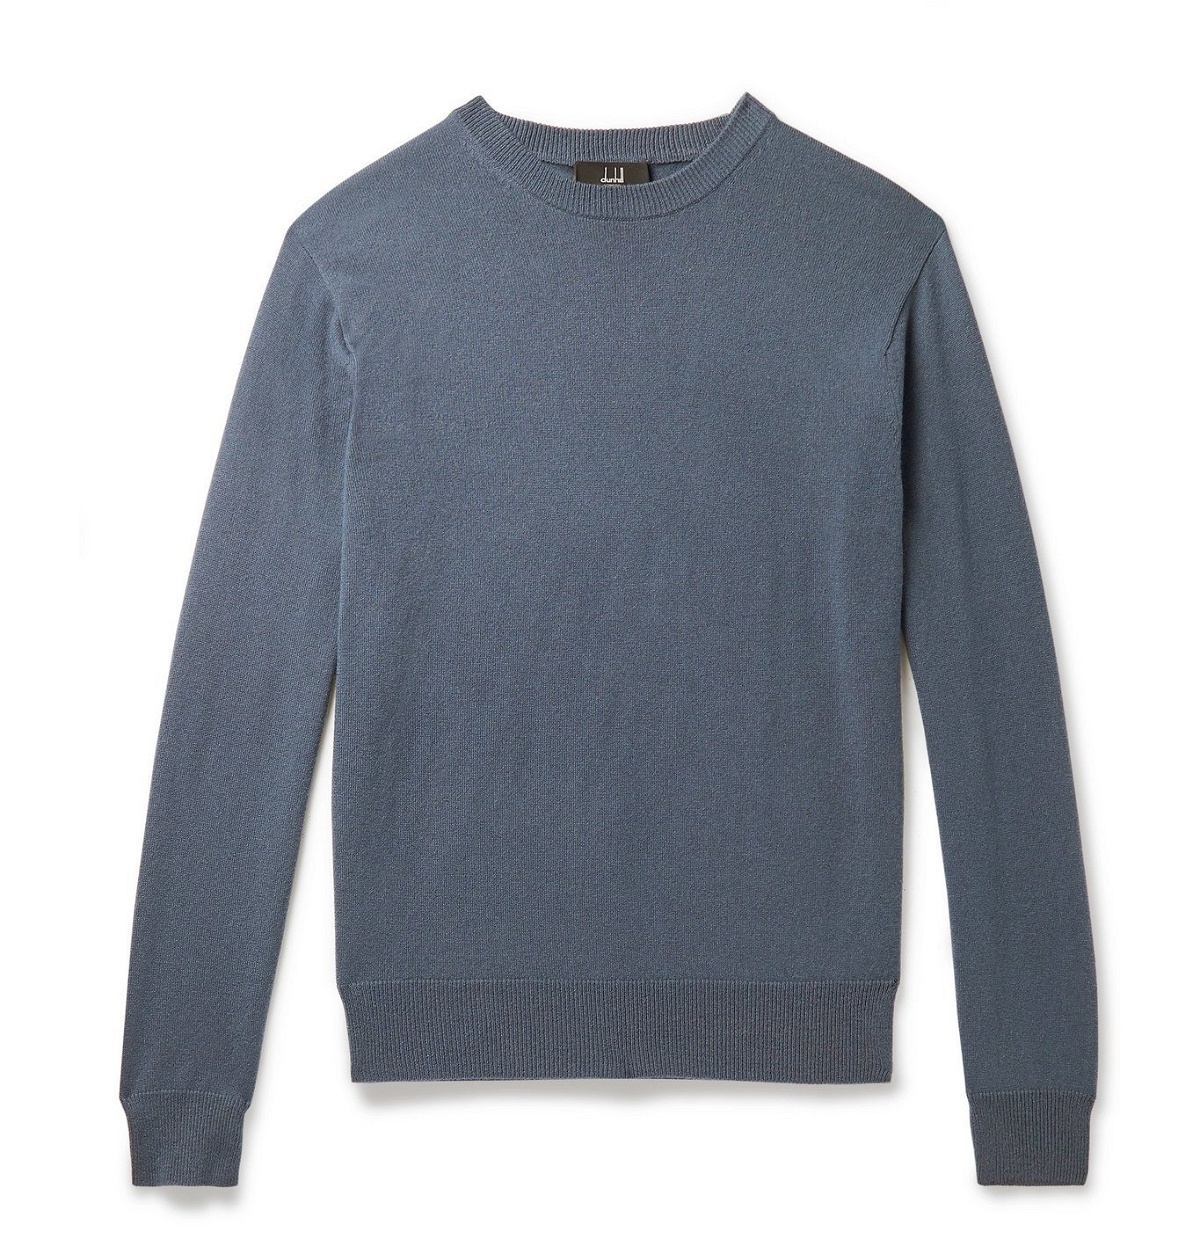 Dunhill - Cashmere Sweater - Blue Dunhill